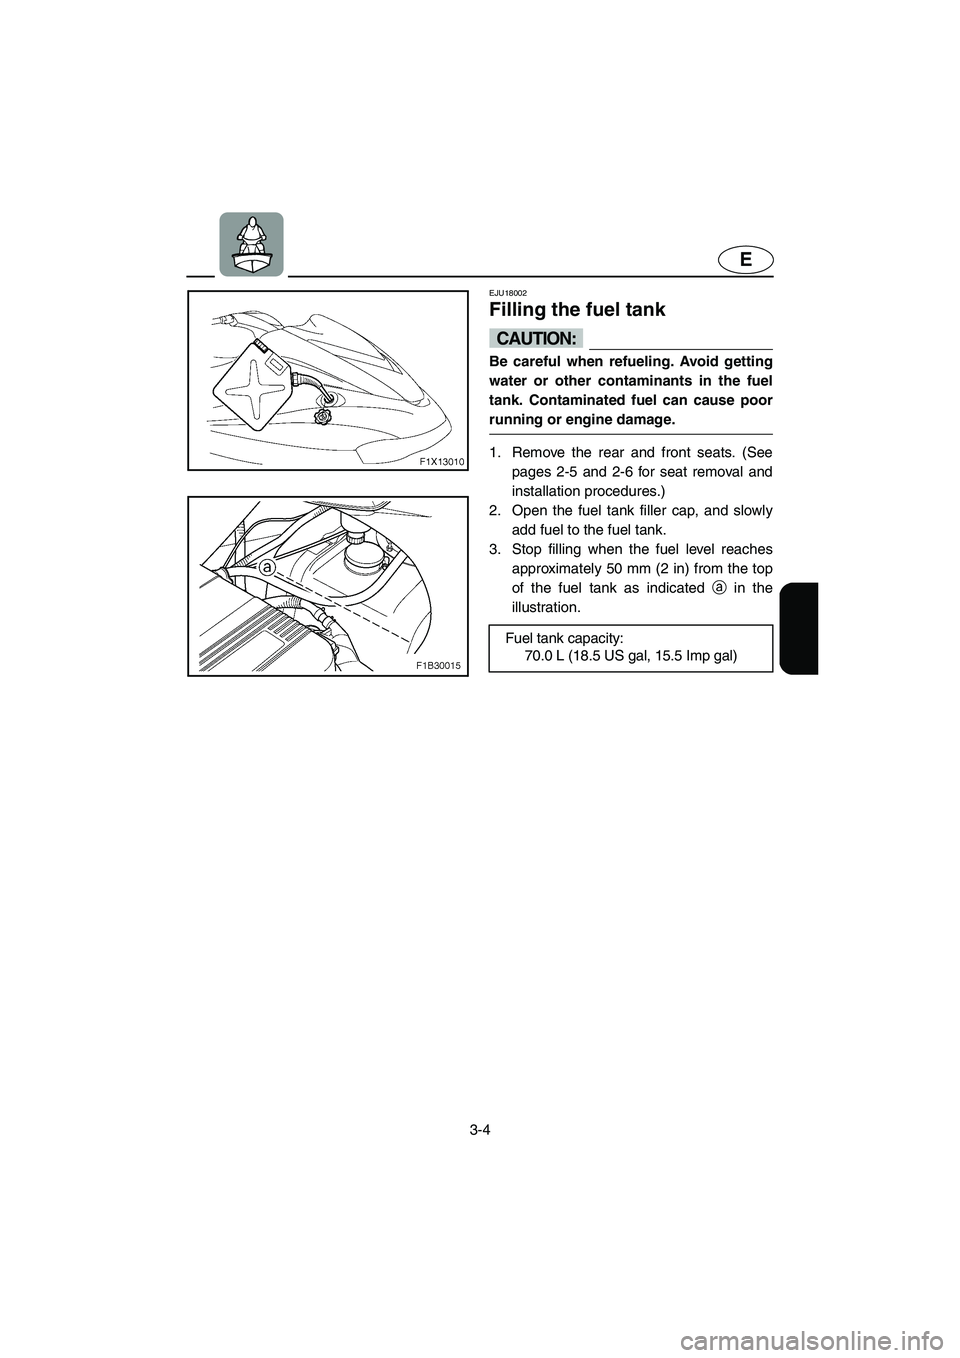 YAMAHA FX HO 2006 Manual PDF 3-4
E
EJU18002
Filling the fuel tank 
CAUTION:@ Be careful when refueling. Avoid getting
water or other contaminants in the fuel
tank. Contaminated fuel can cause poor
running or engine damage. 
@
1. 